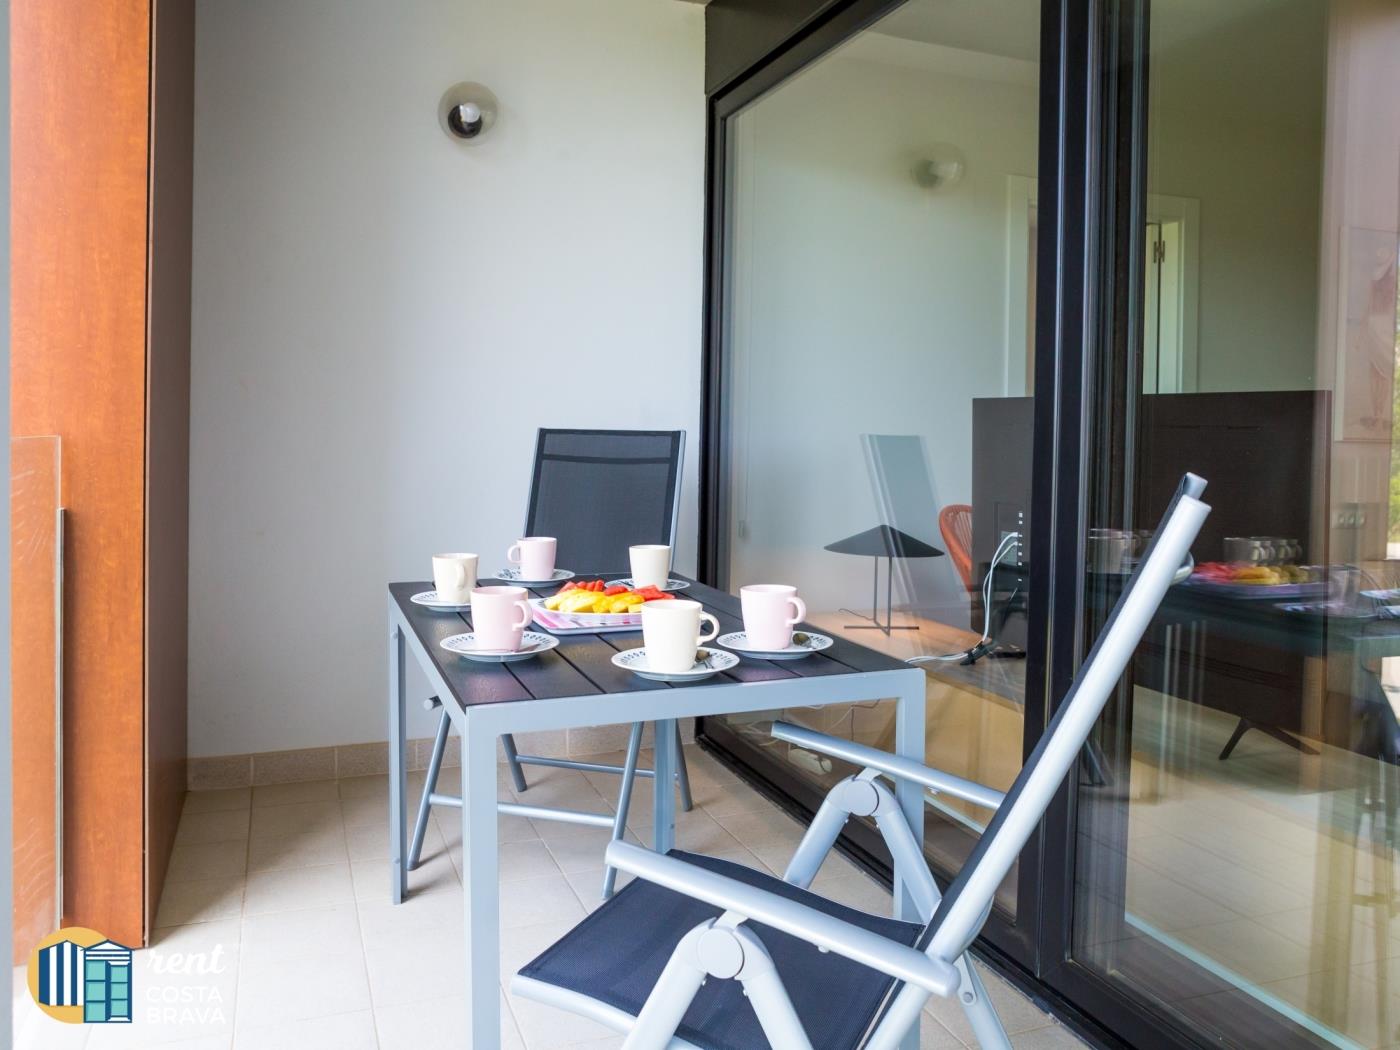 Newly built Berlin flat only 2 minutes walking distance to the city centre in Platja d'Aro